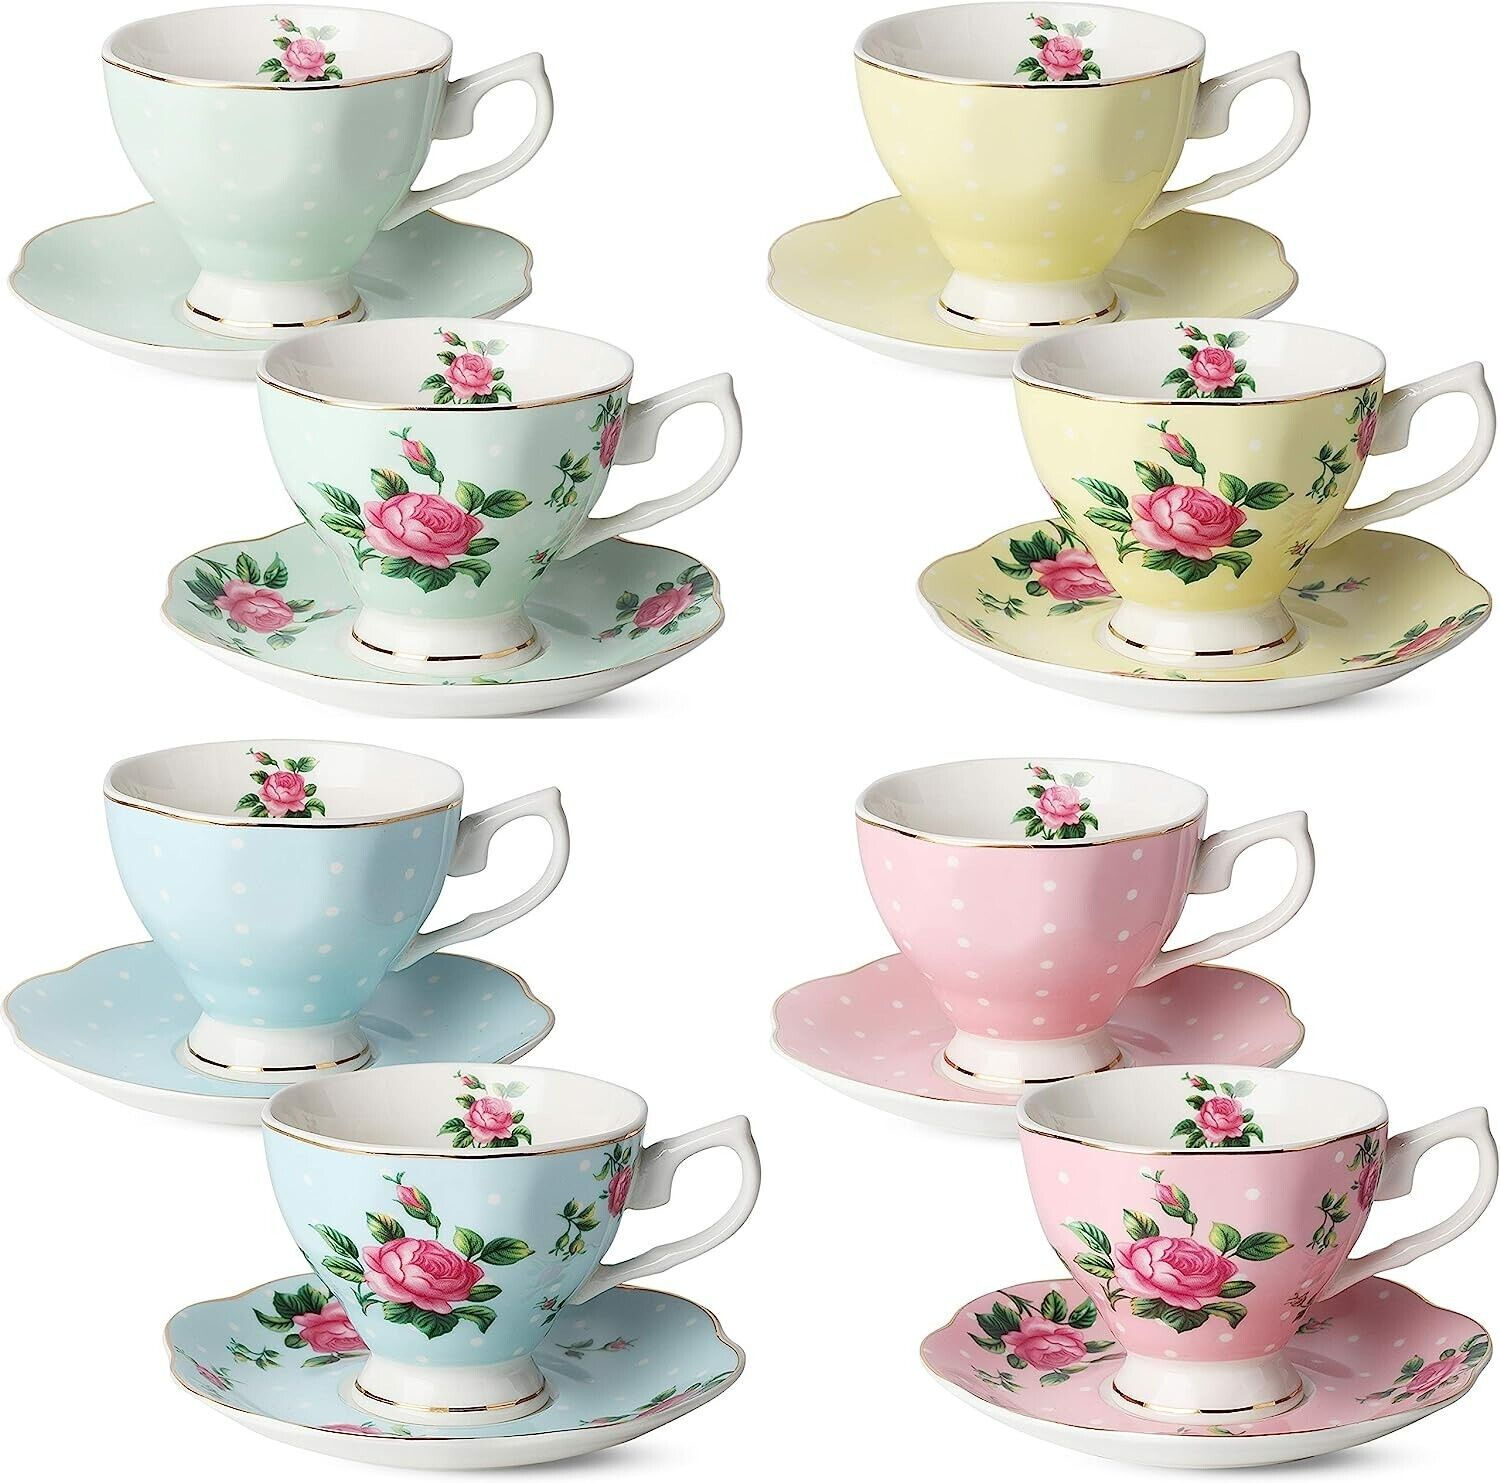 Btat- Floral Tea Cups and Saucers, Set of 8 (8 Oz) Multi-Color with Gold Trim an